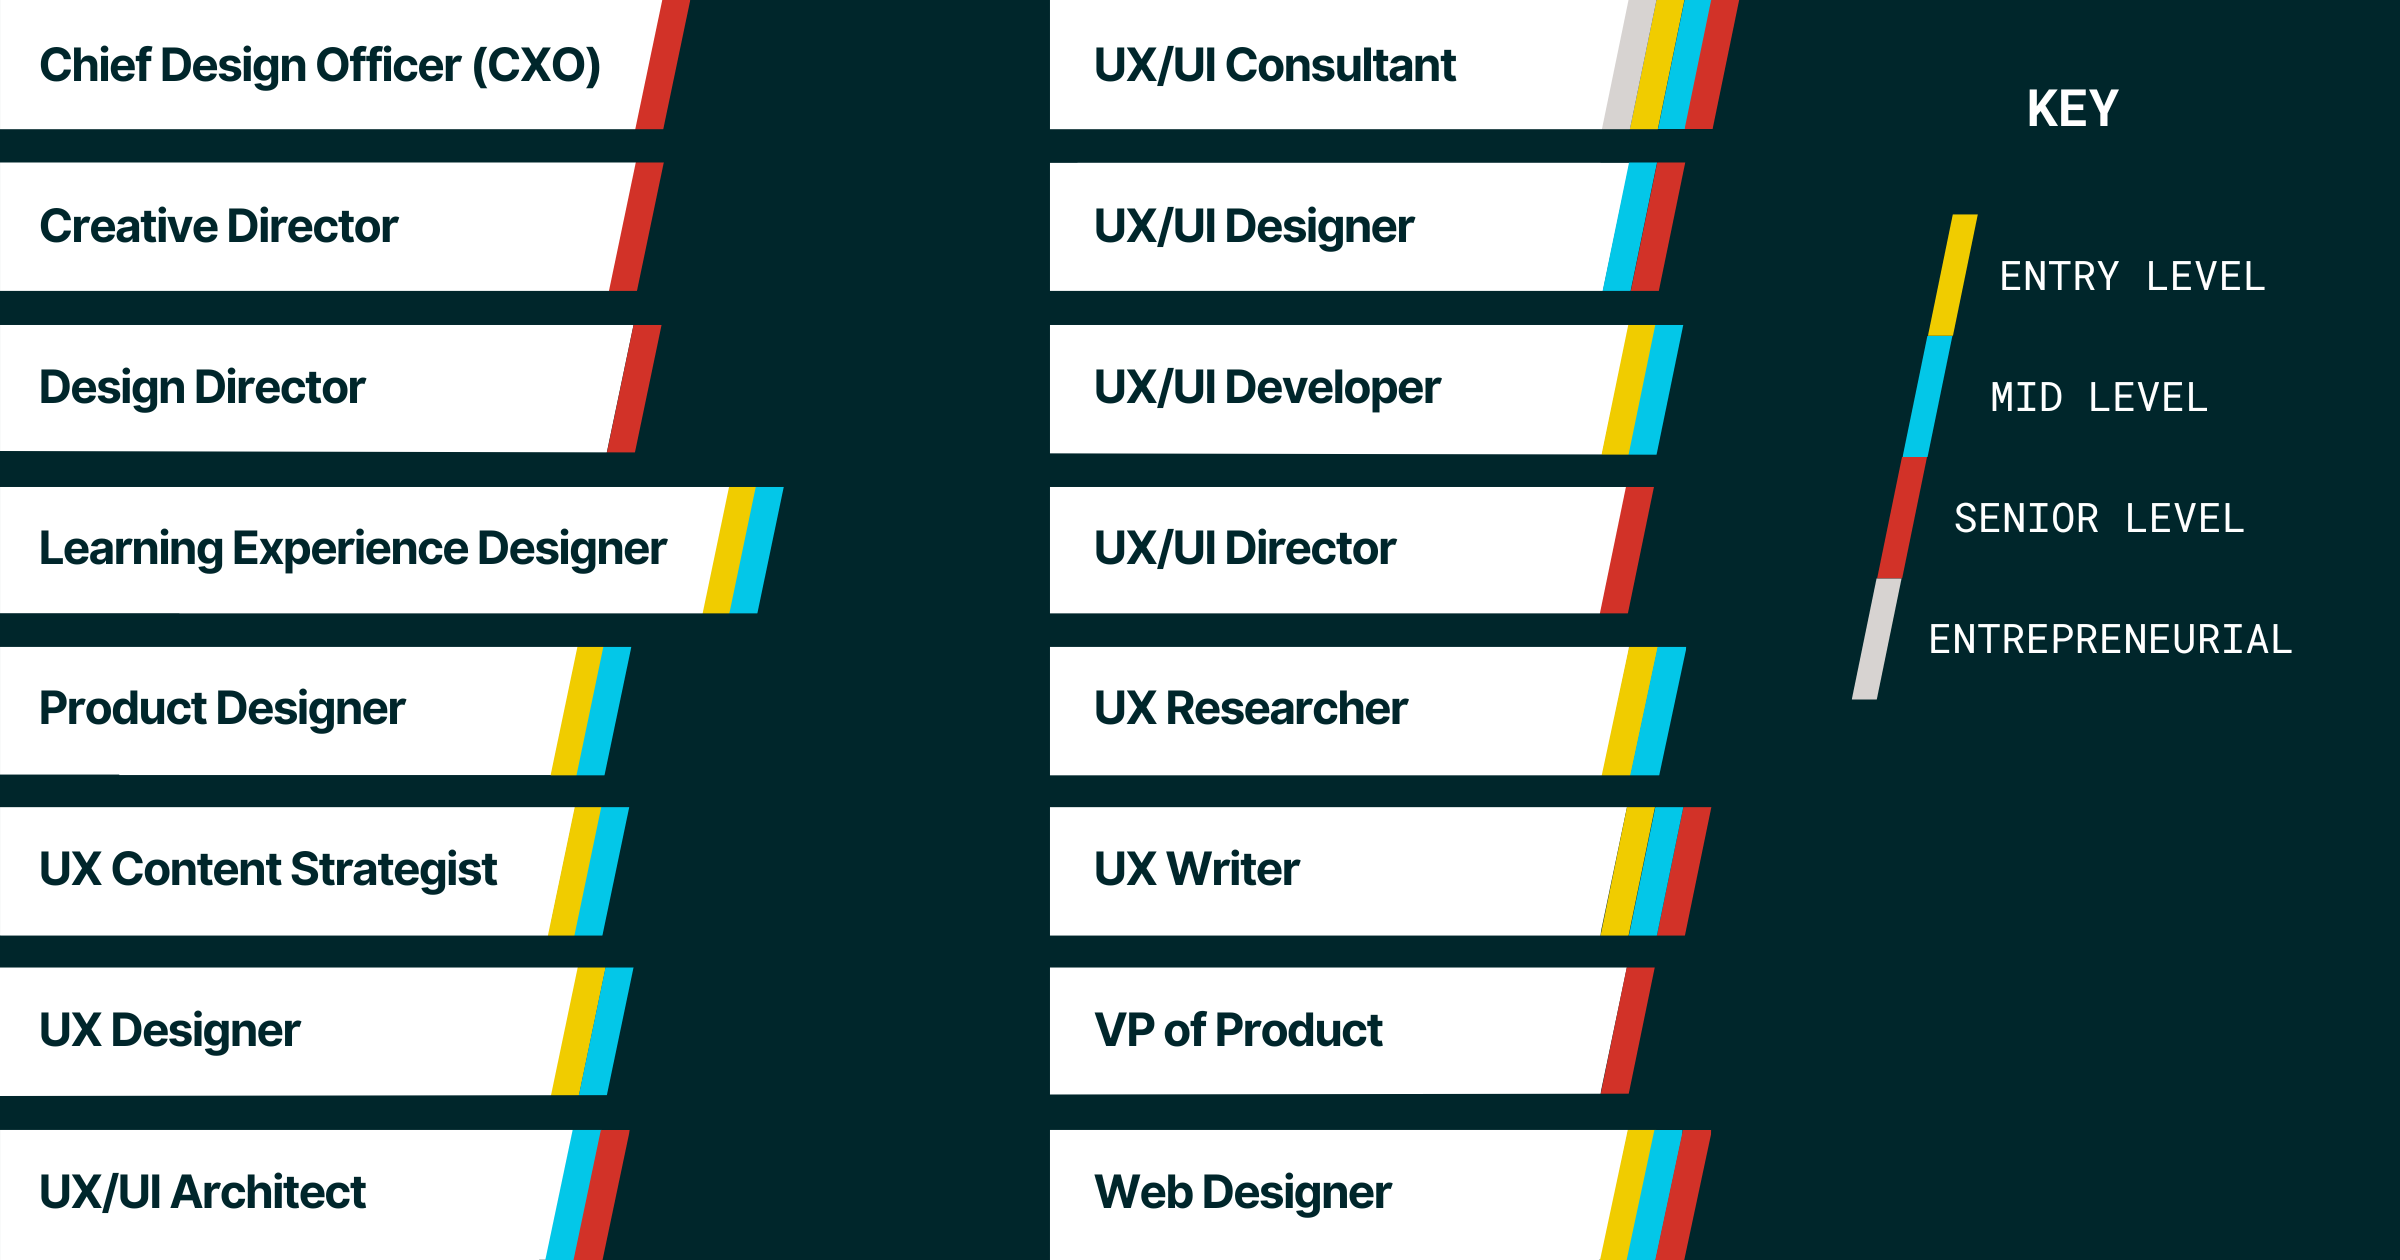 A graphic visualizing 16 roles that call for a UX/UI skill set, alongside categorizations indicating the required expertise level for each role. 